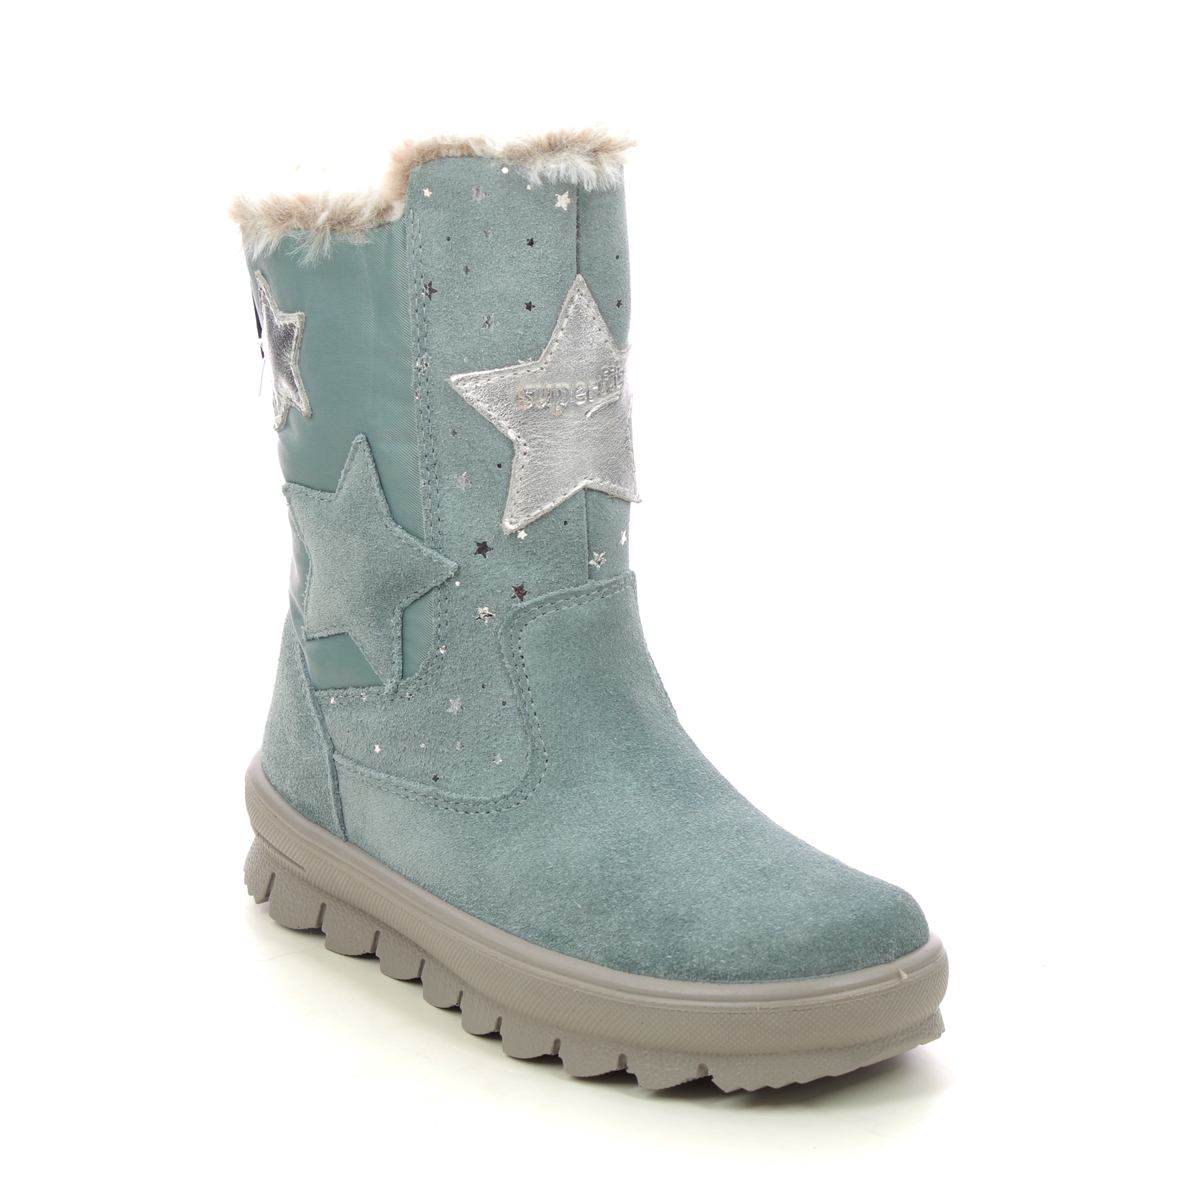 Superfit Flavia Star Gtx Blue Suede Kids Girls Boots 1000219-7500 In Size 30 In Plain Blue Suede For kids